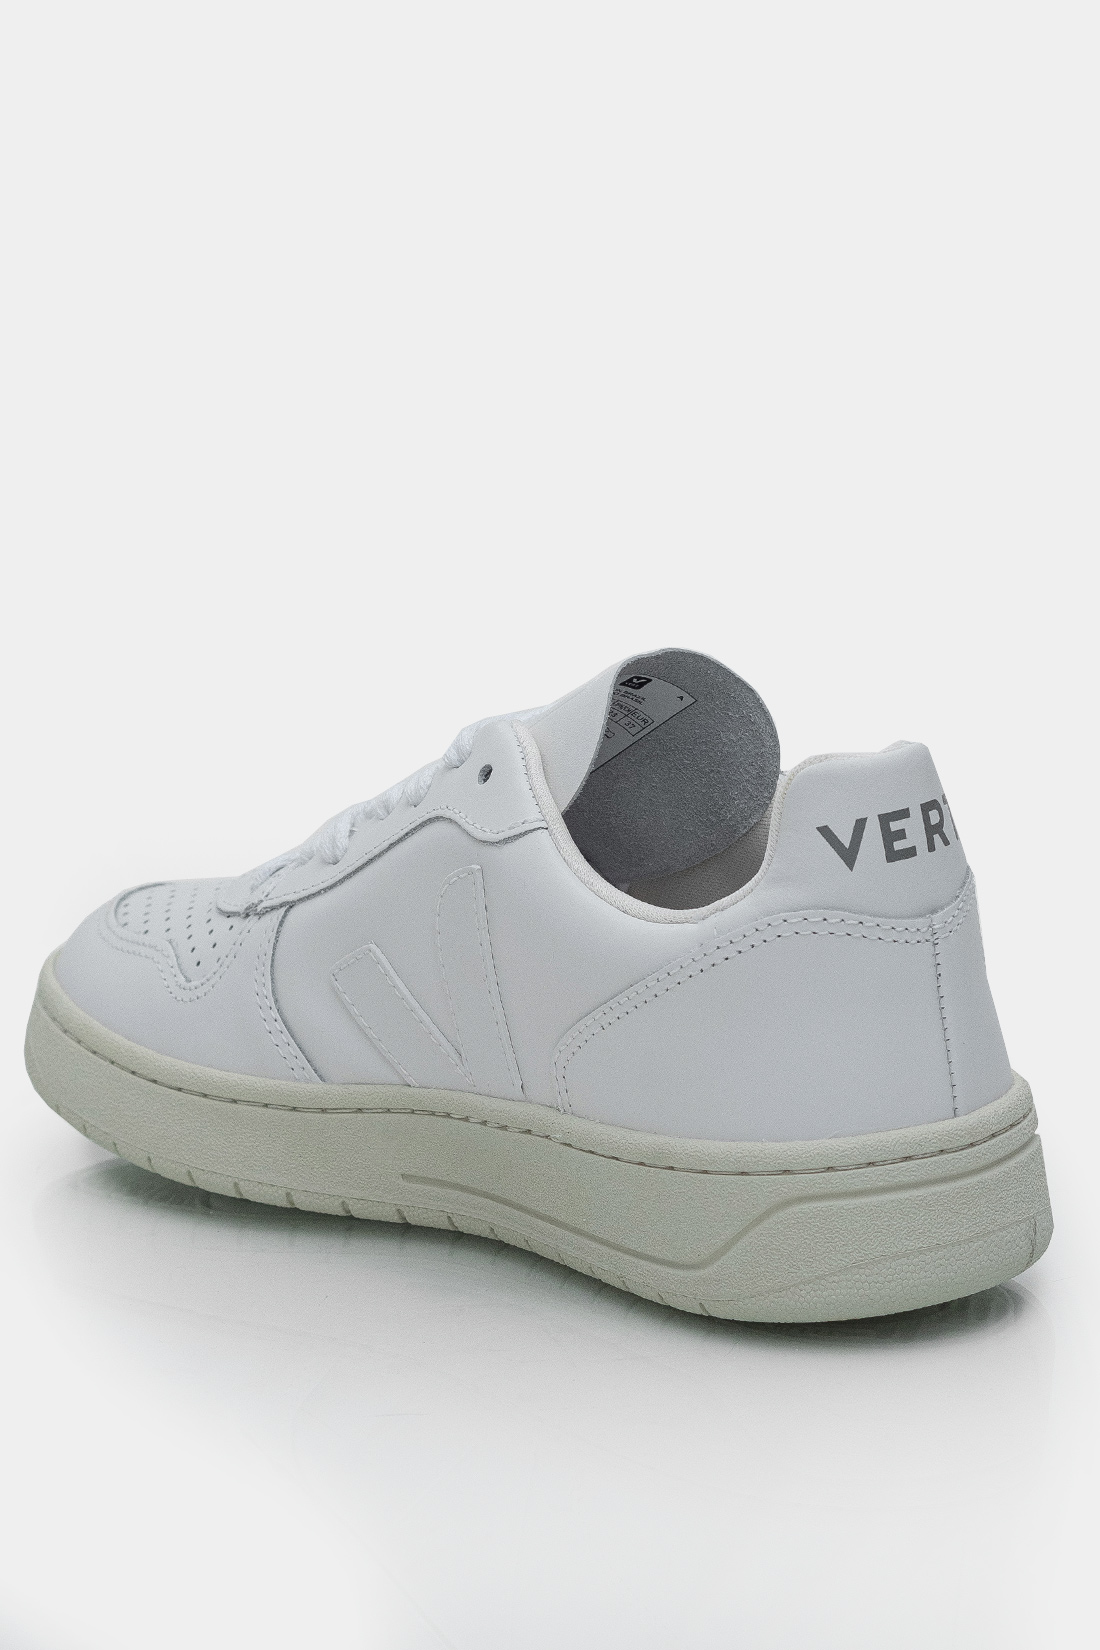 Tenis Casual Vert Leather Couro Extra